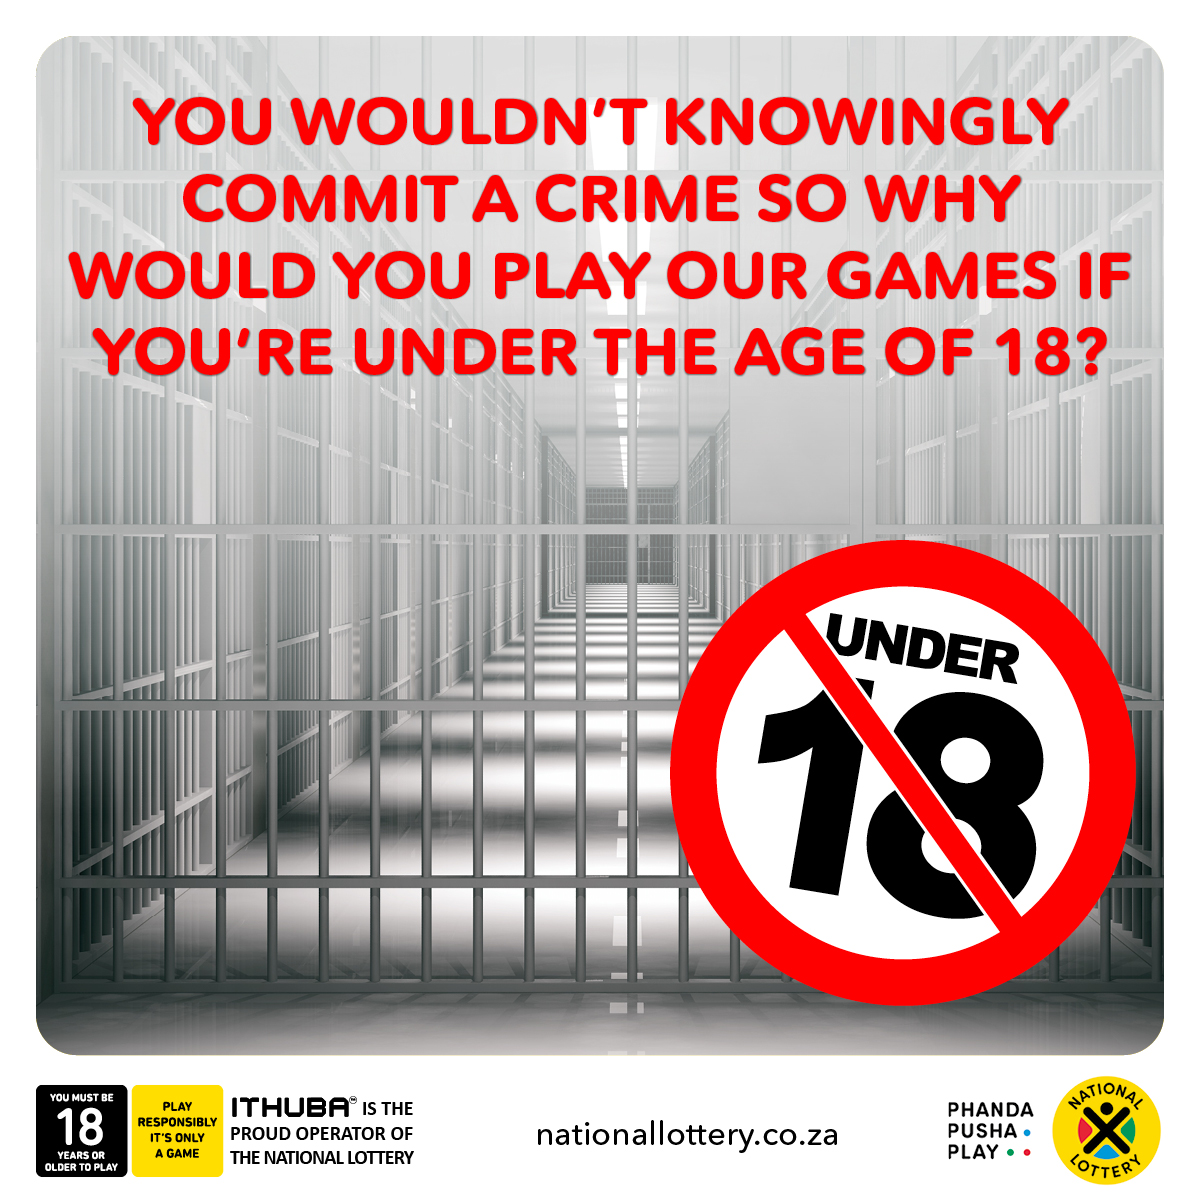 Age is not just a number to us. If you are not 18 years or older, you should not be playing any National Lottery games. Only persons over the age of 18 years old can #PhandaPushaPlay#PlayResponsibly.